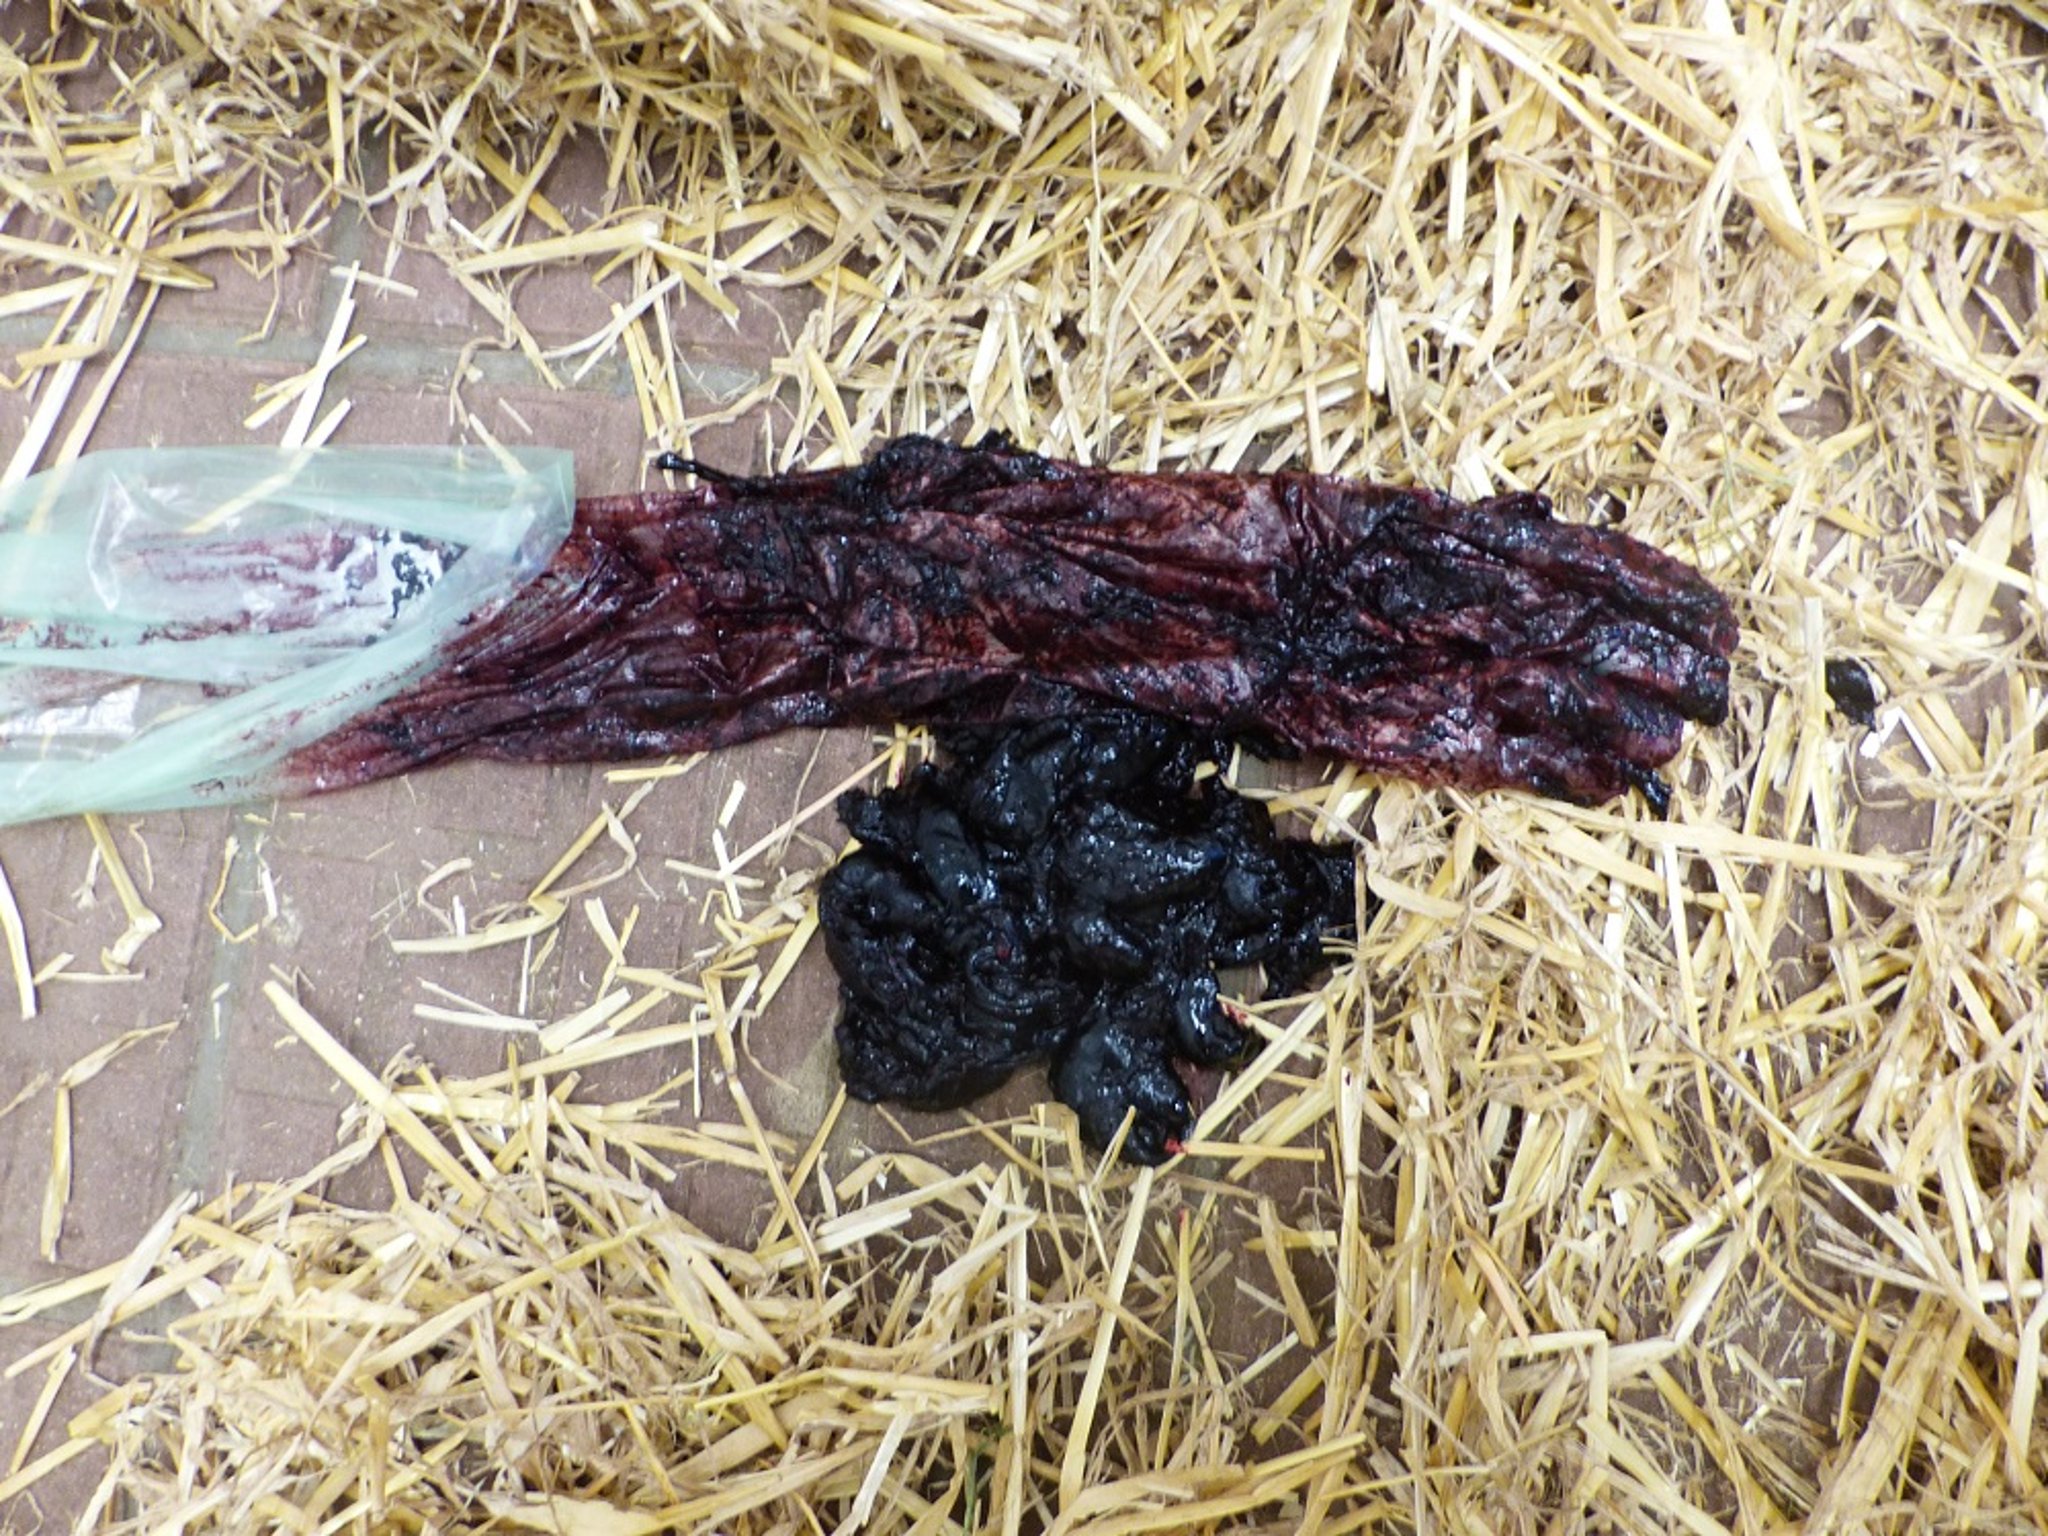 Feces of cow with hemorrhagic bowel syndrome